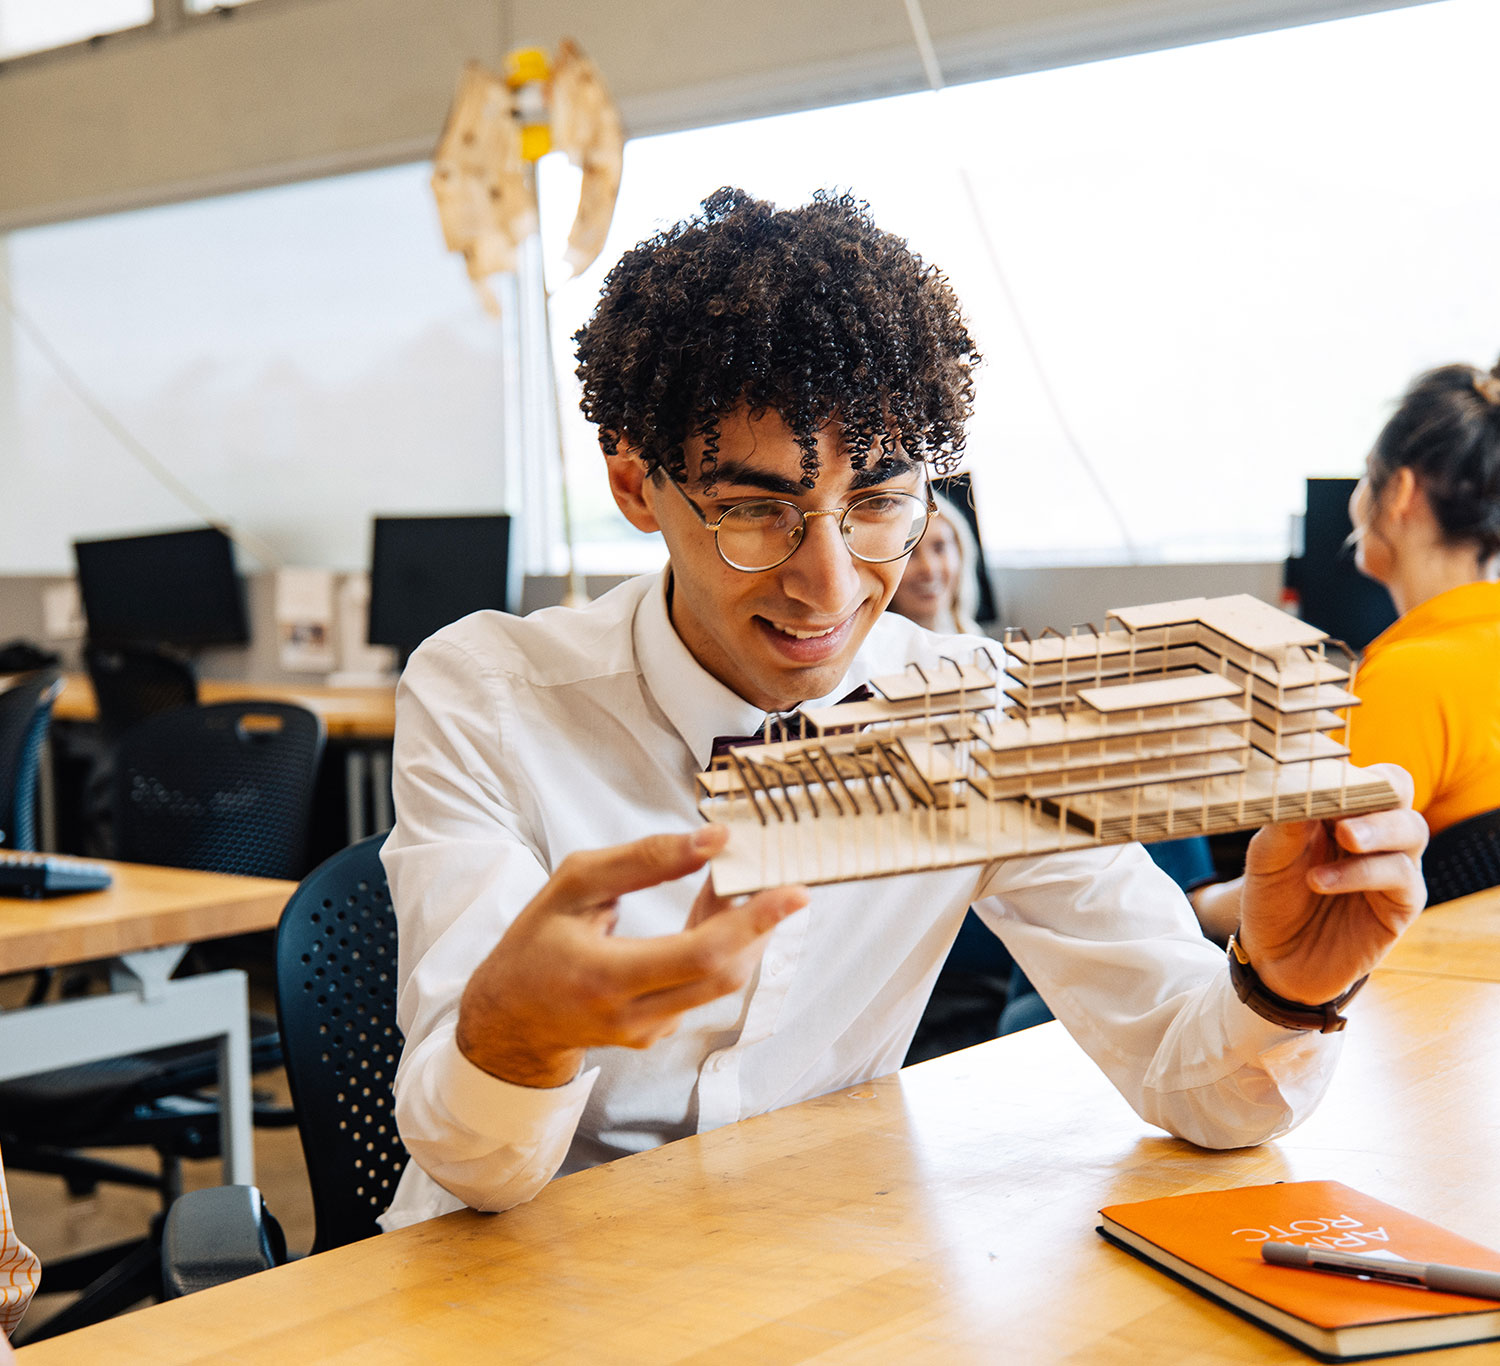 An architecture student inspects a recently created model of a multi-story building